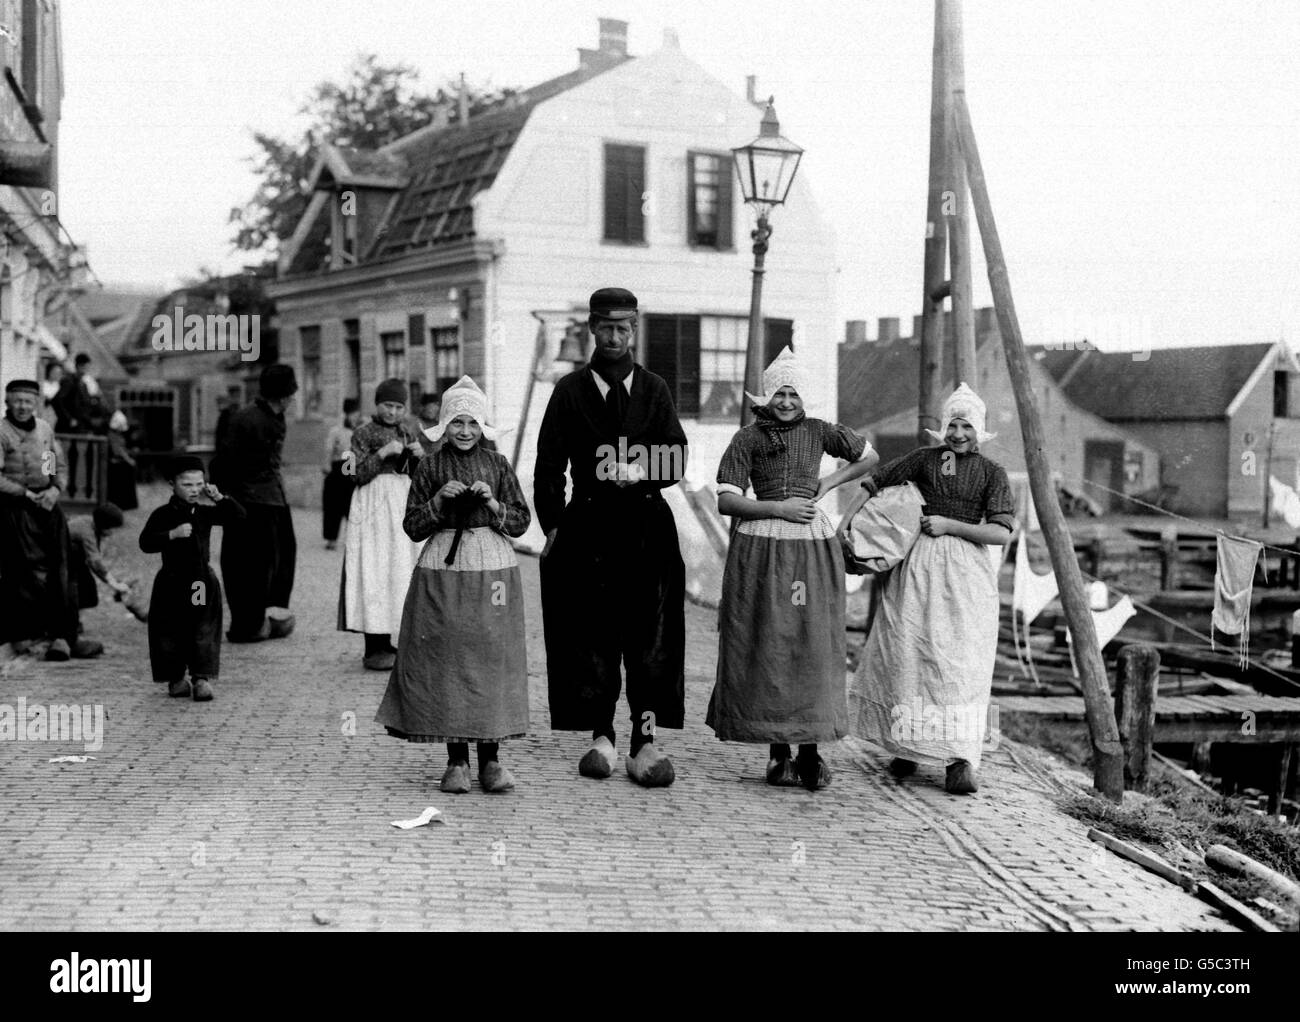 HOLLAND 1910: Fisherfolk wearing traditional dress, including clogs and lace caps, in the Dutch port of Volendam. Stock Photo